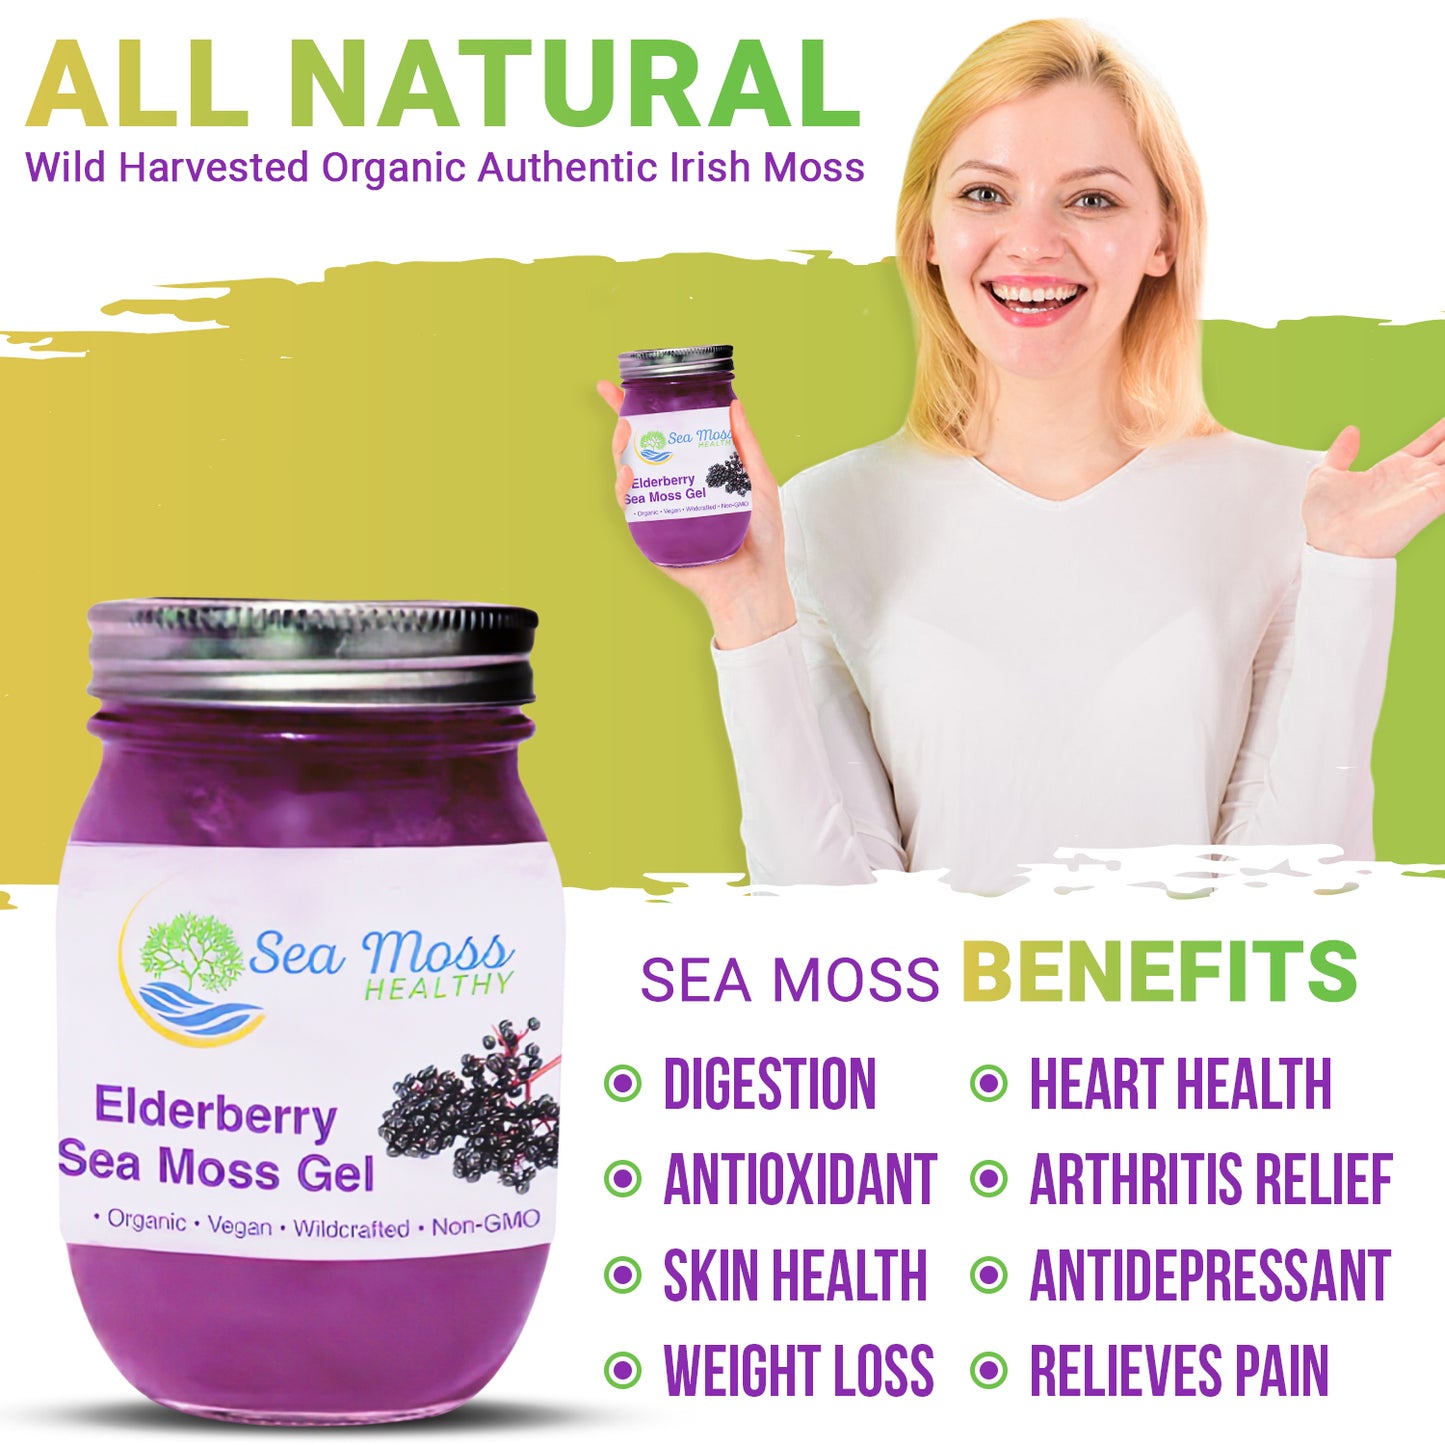 Sea Moss Infused with Elderberry